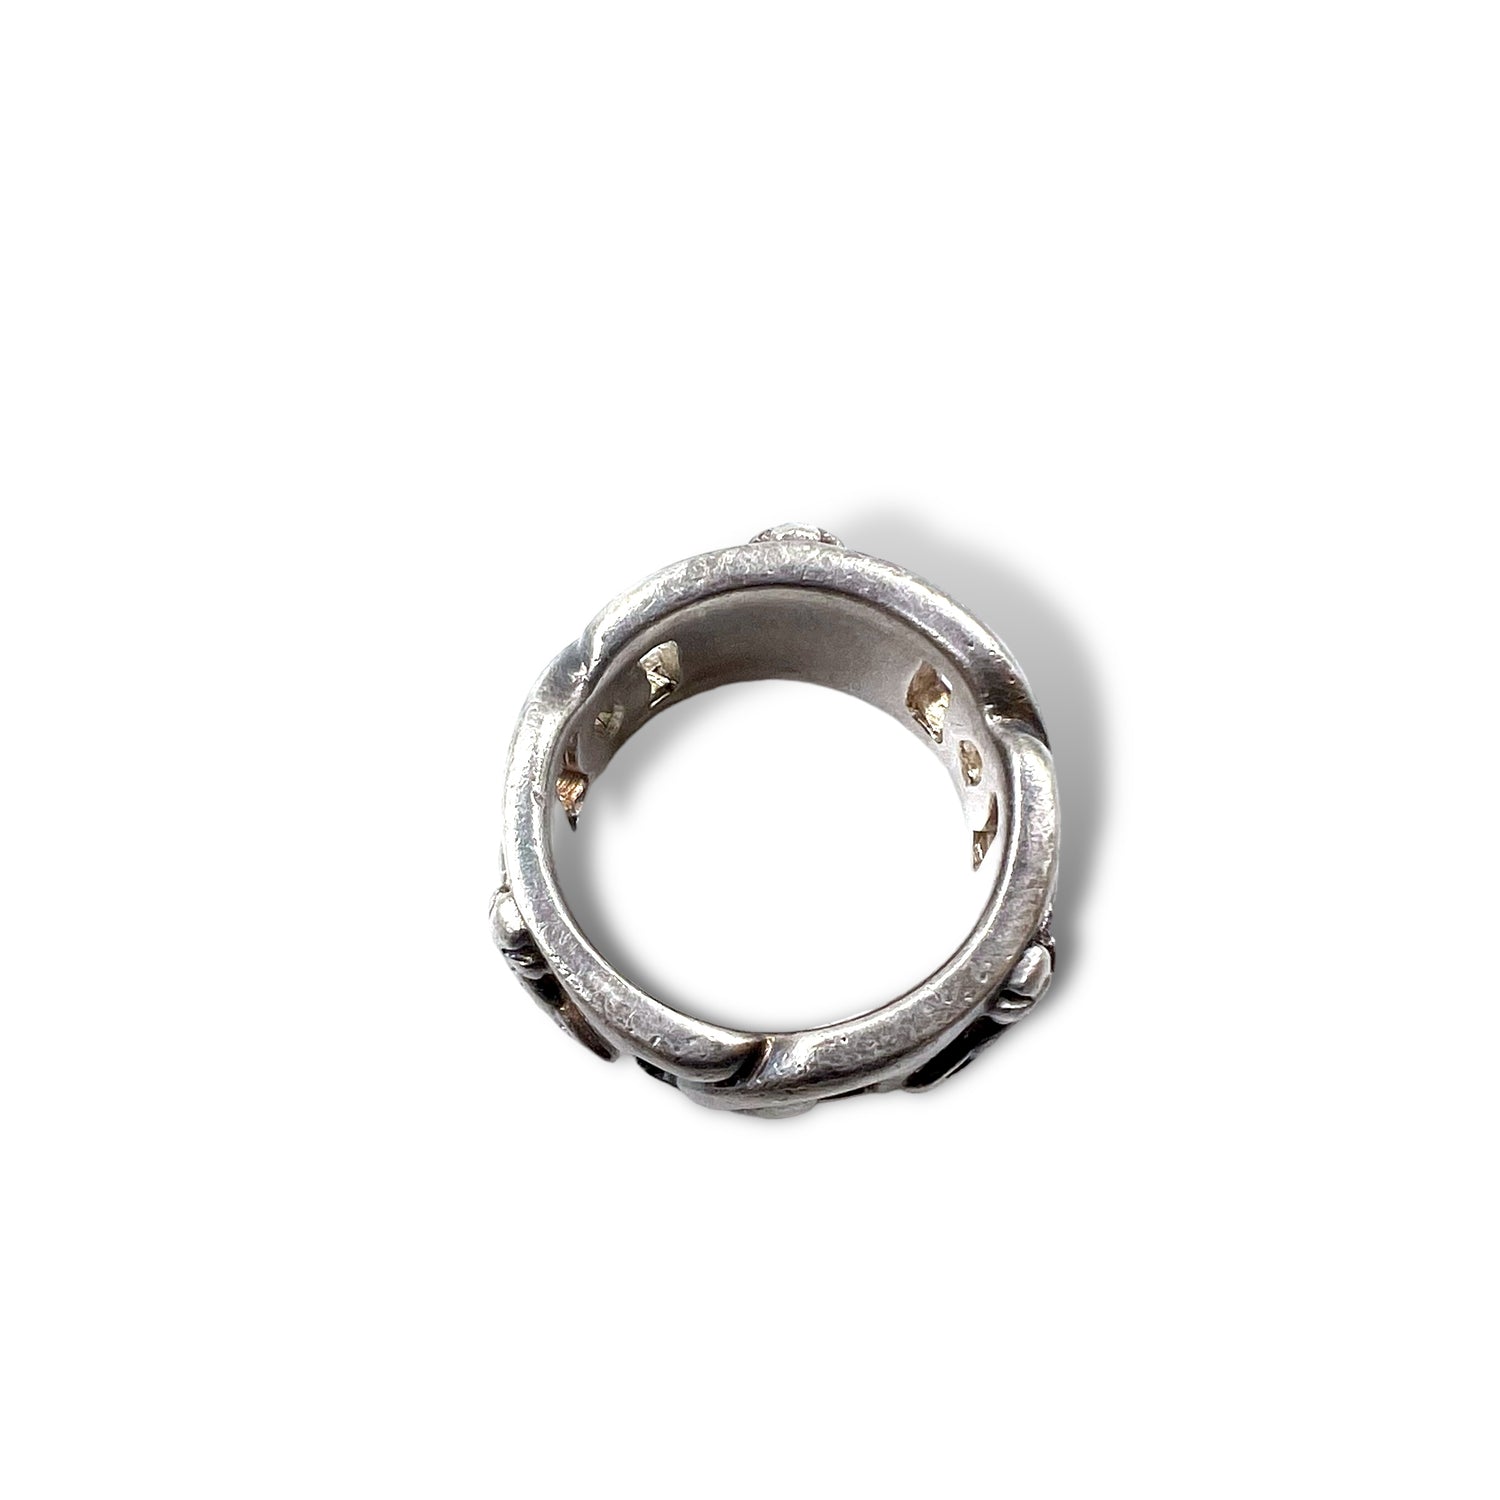 VIVIENNE WESTWOOD Orb Motif Silver Ring Ring 1us Size #4-4.5 